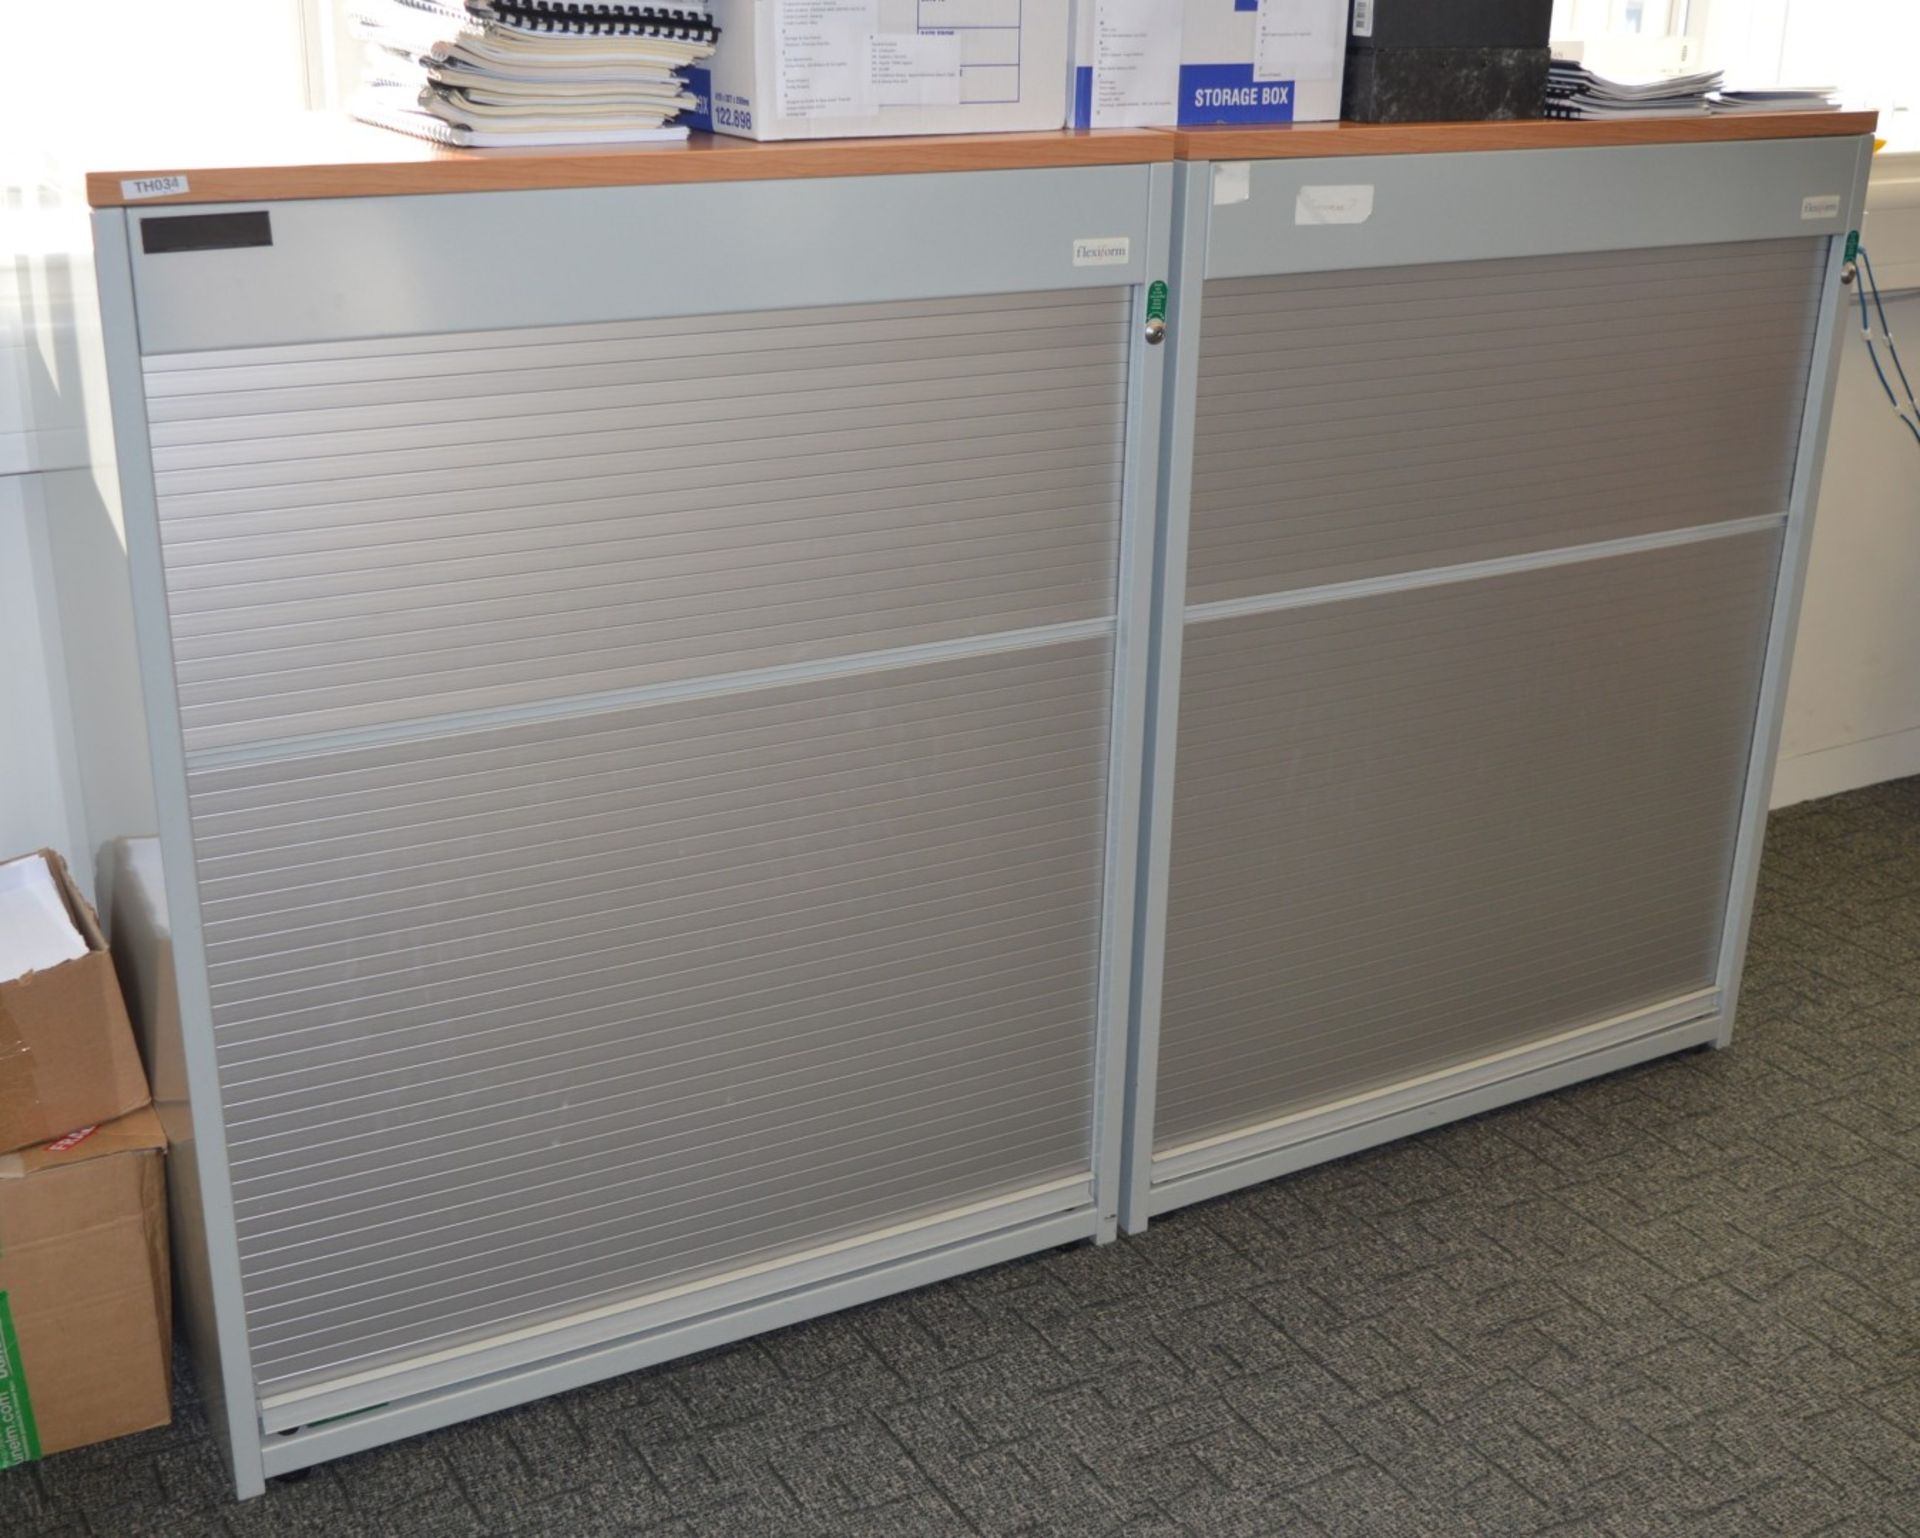 2 x Flexiform Tambour Door Office Filing Cabinets - Grey and Beech Finish - High Quality Office